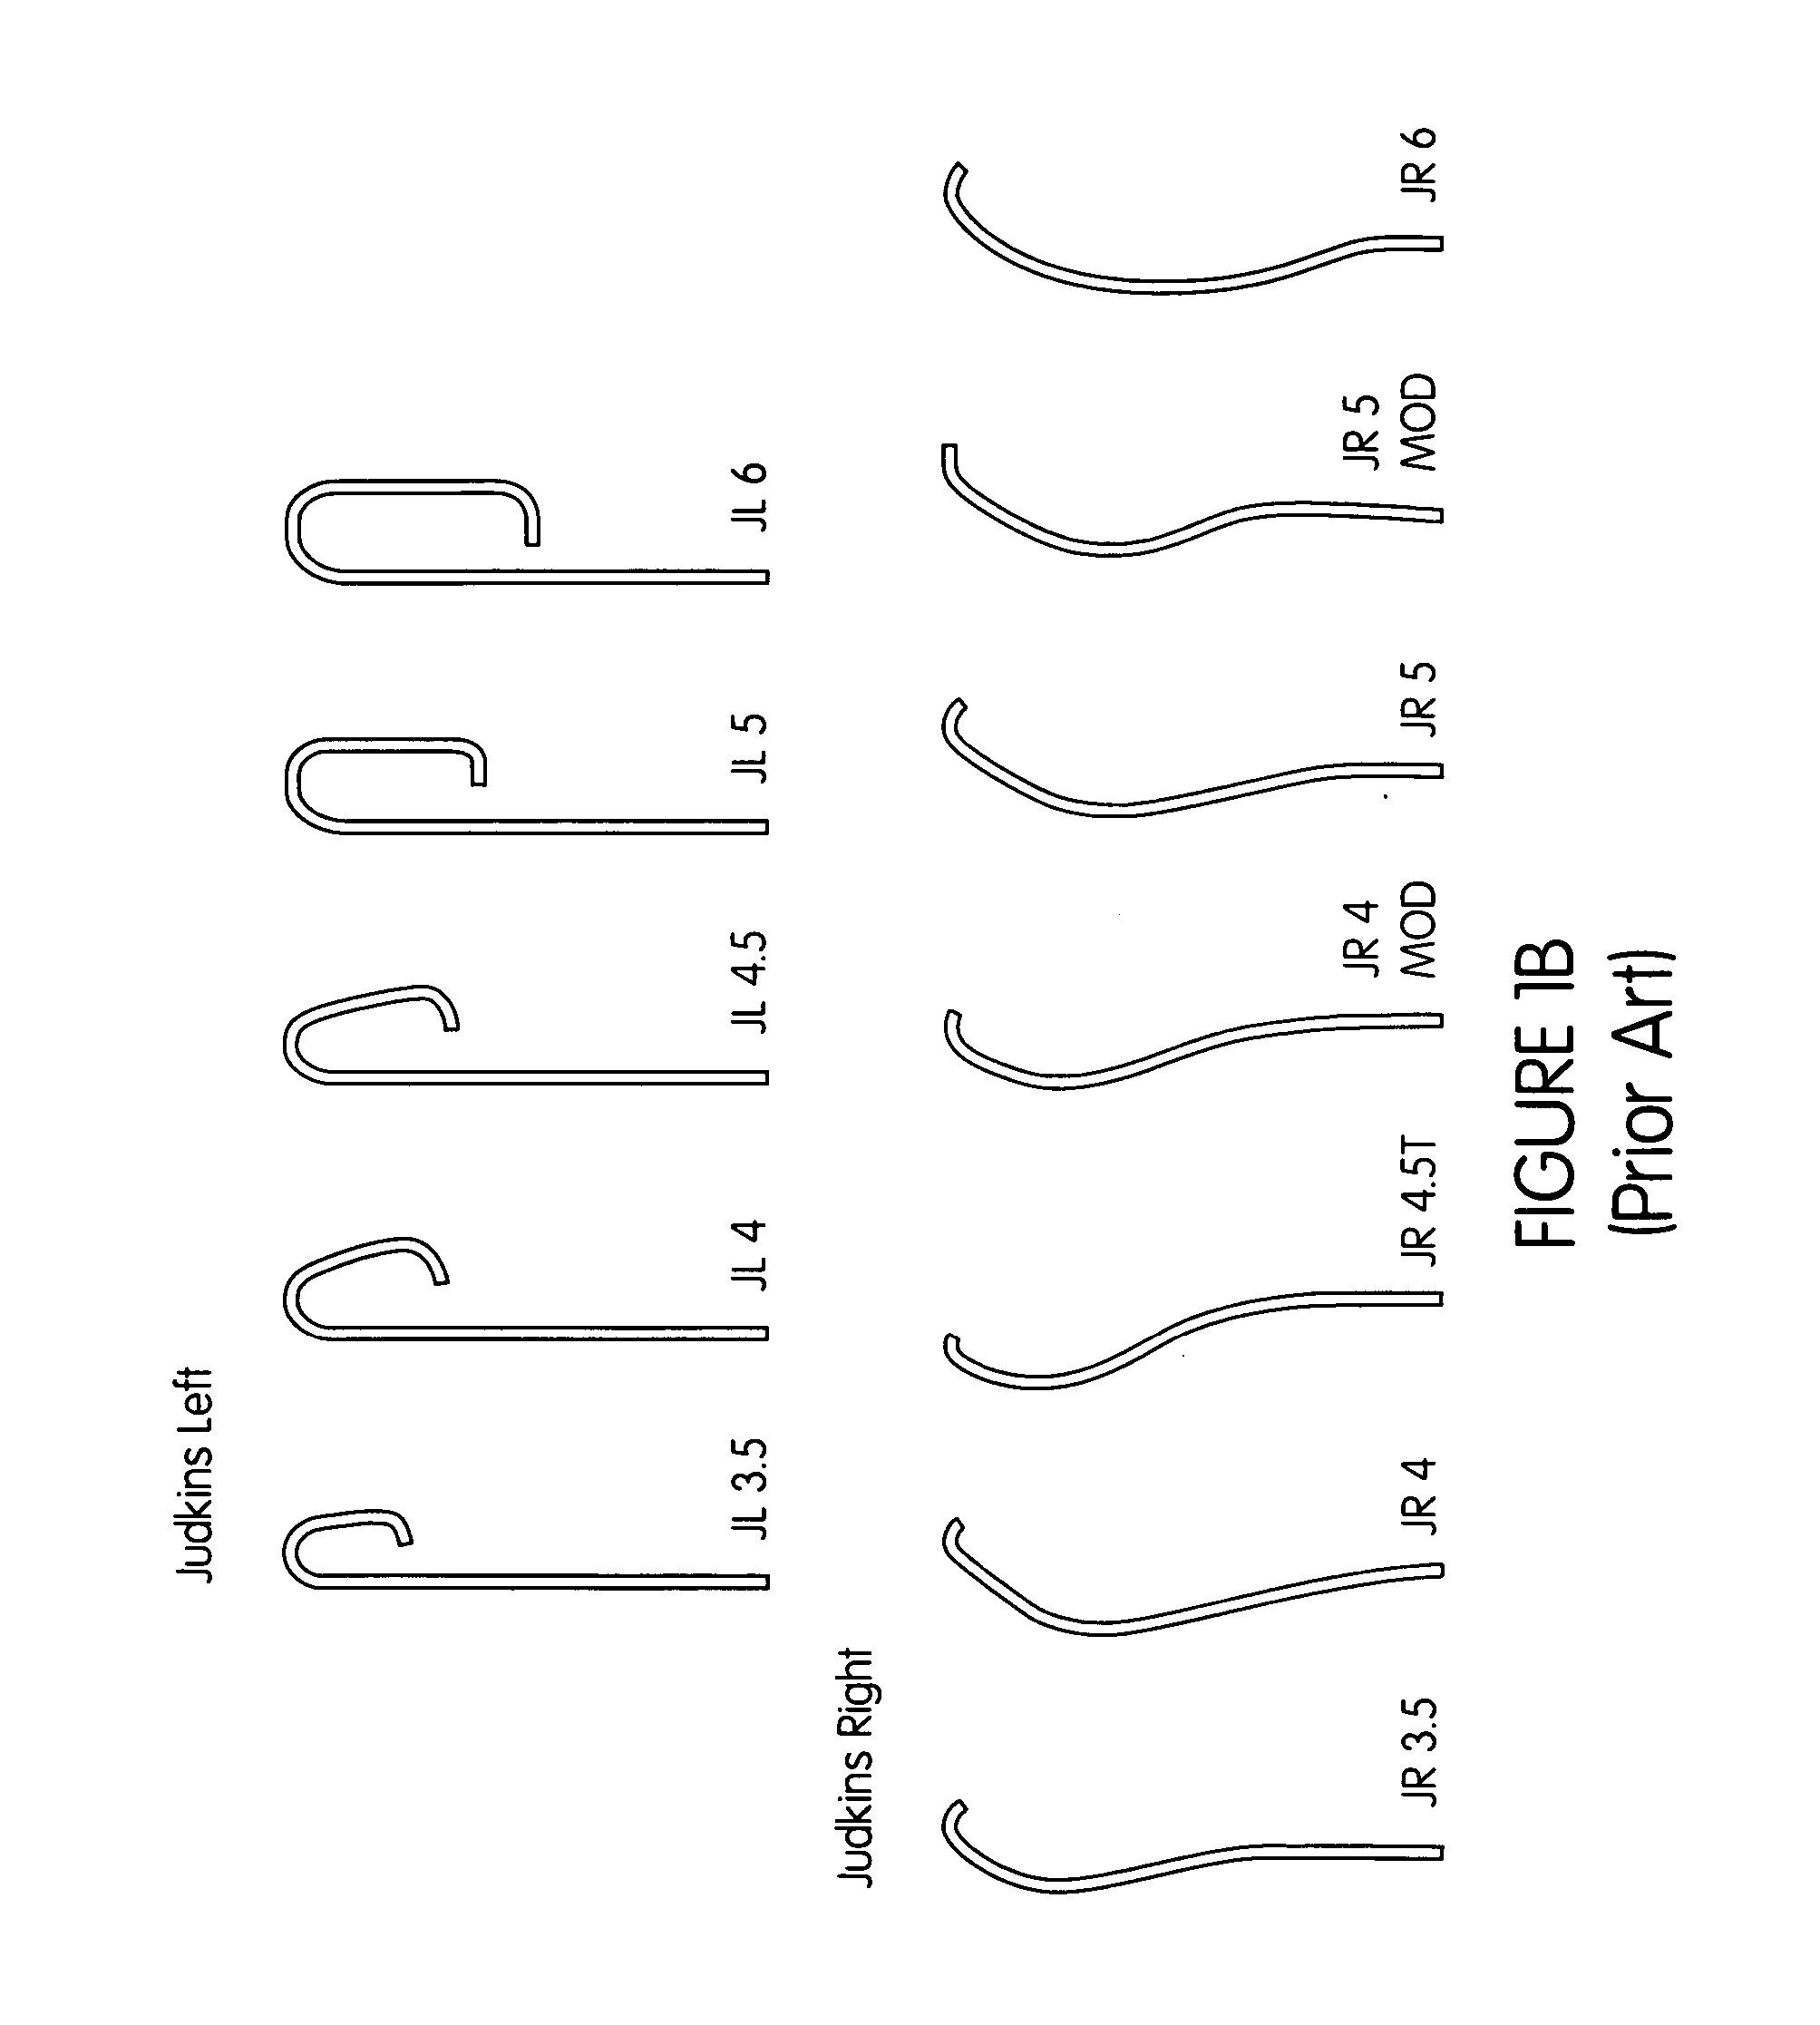 Catheter for diagnostic imaging and therapeutic procedures